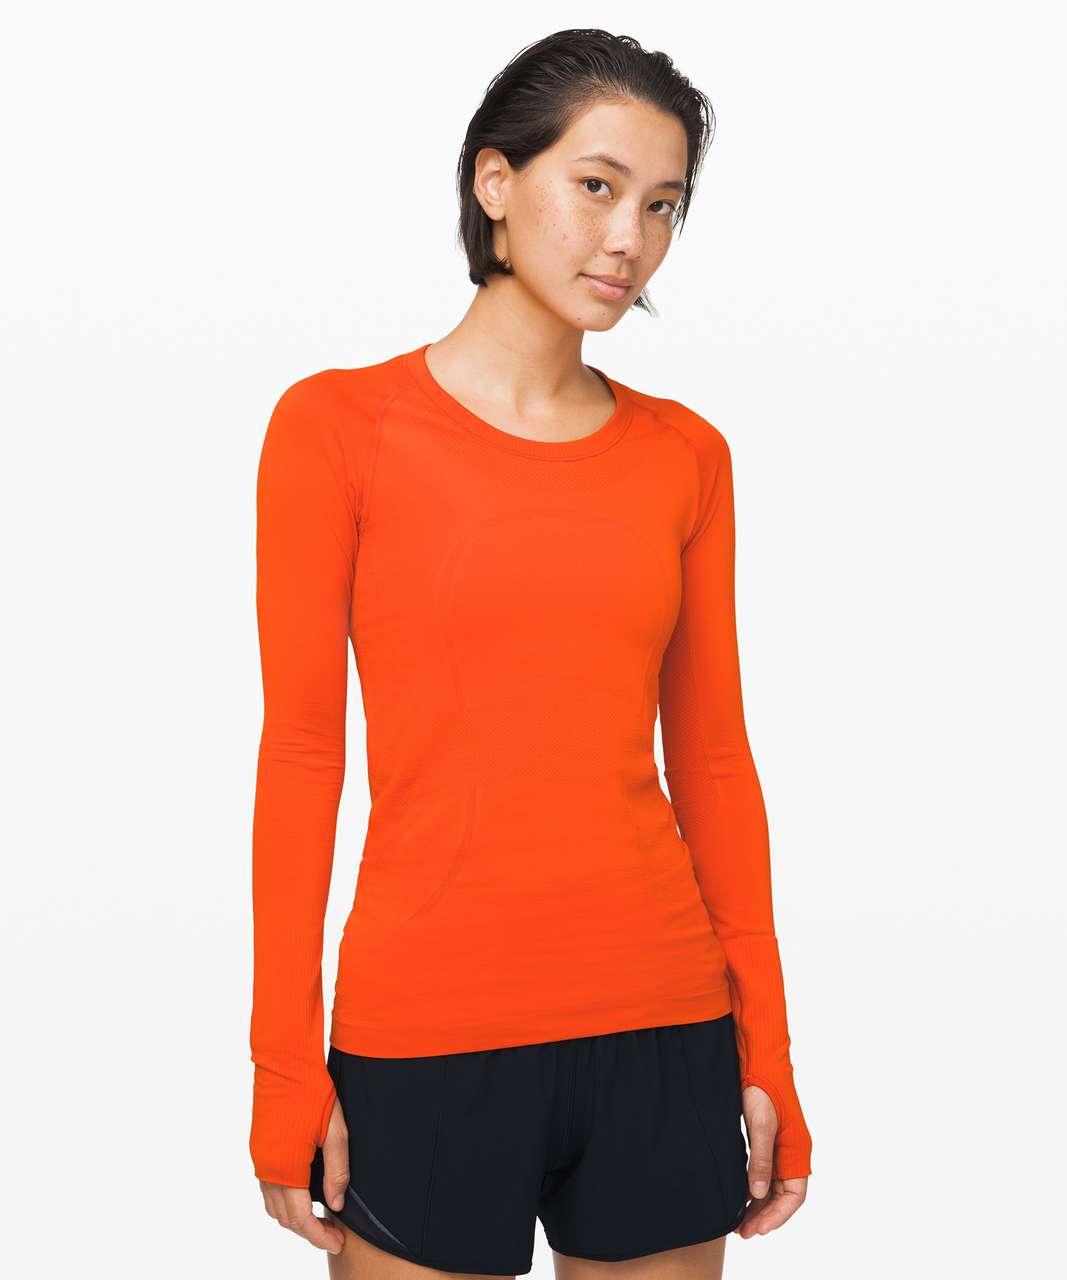 Lululemon Swiftly Tech Long Sleeve Crew - Expedition / Expedition